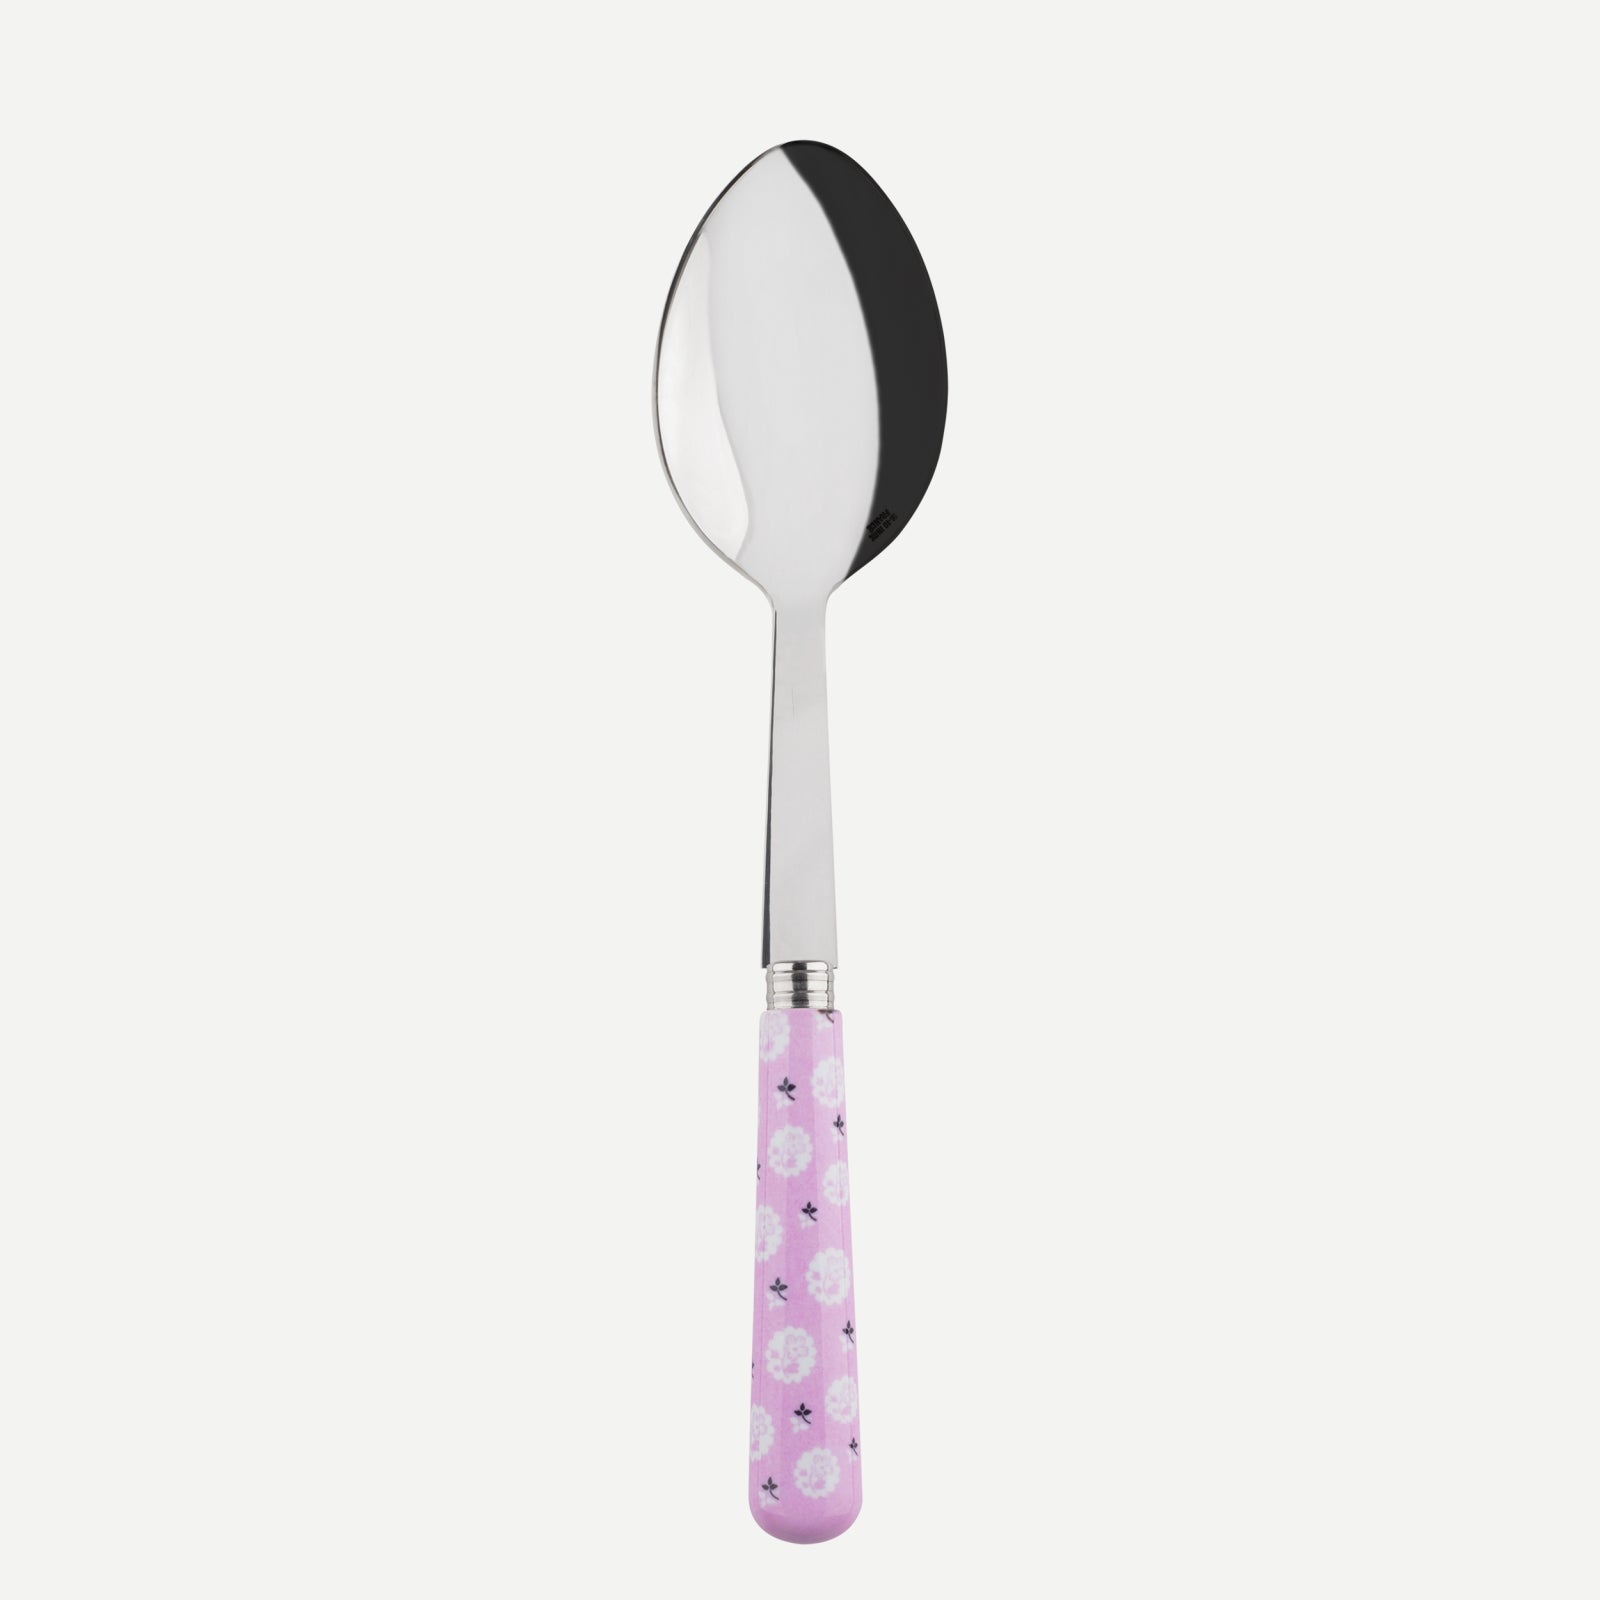 Serving spoon - Provencal - Pink